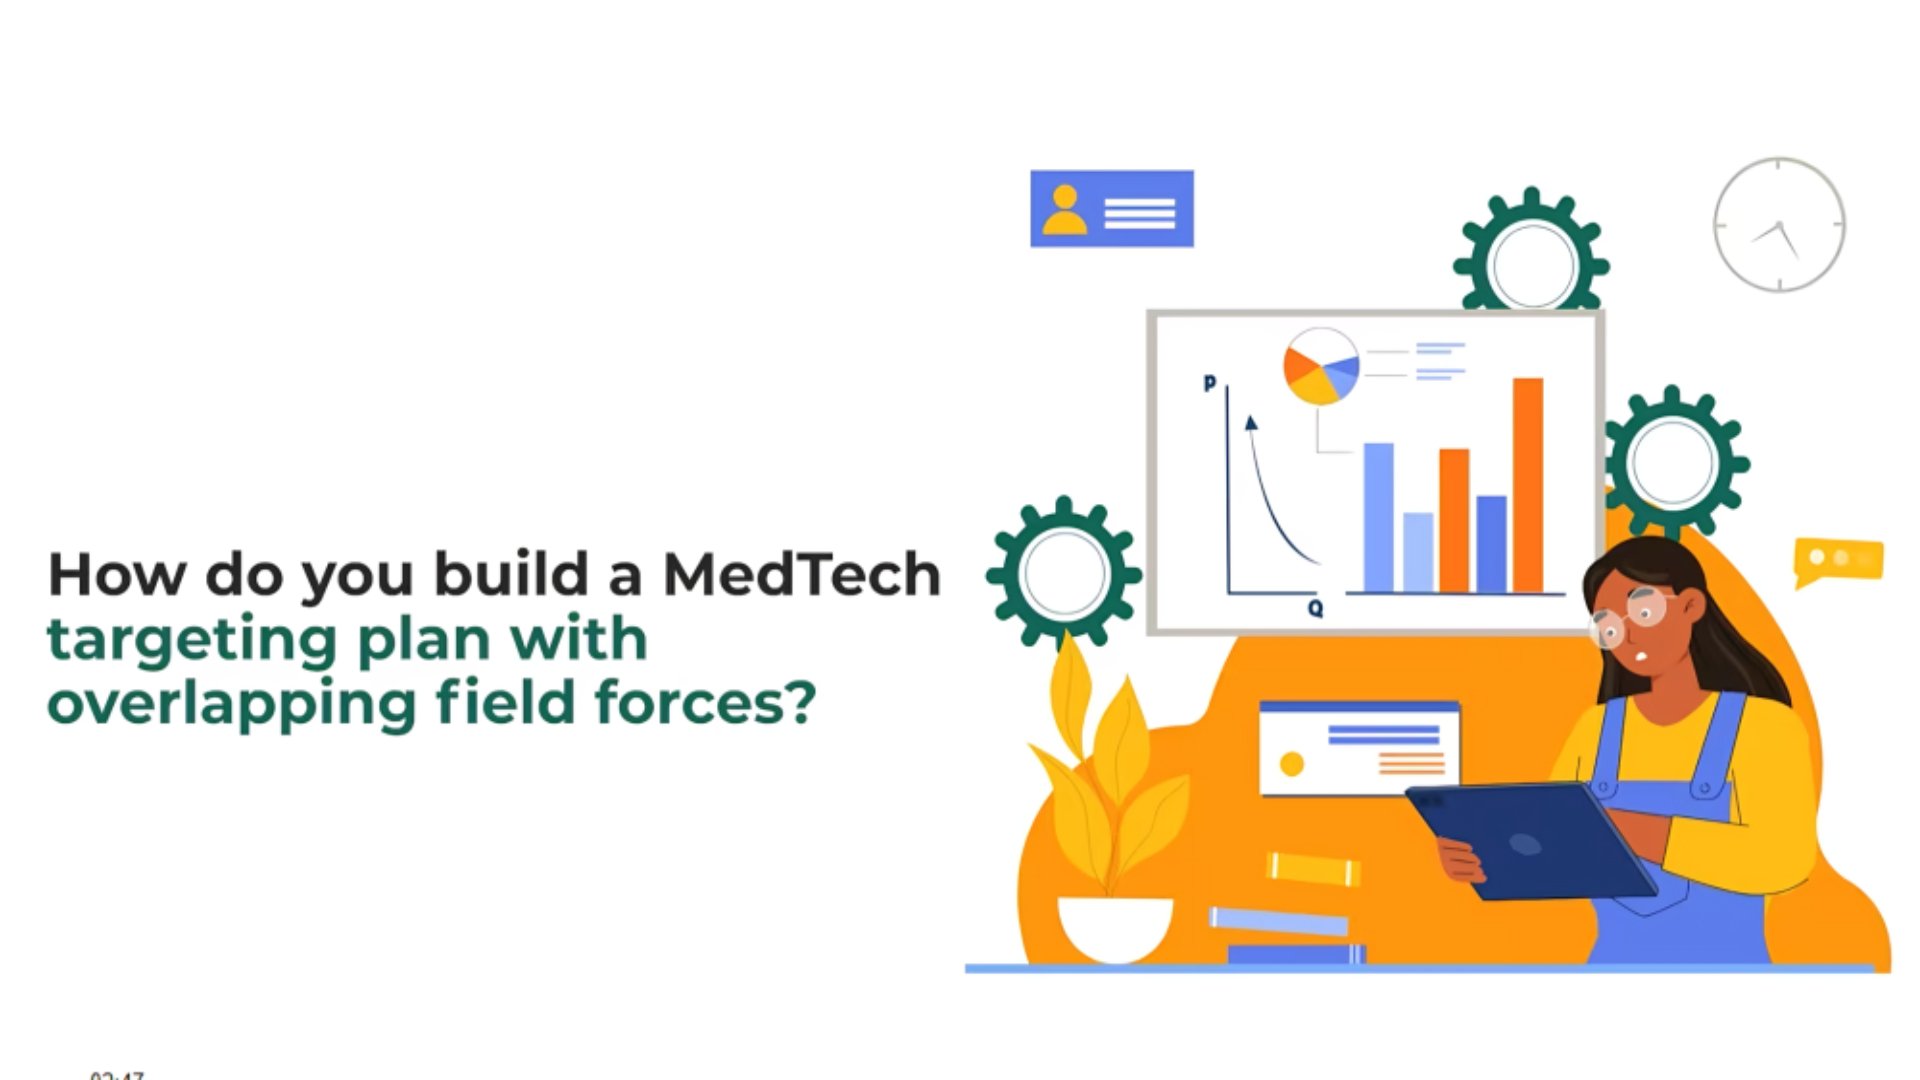 How to Build a MedTech Targeting Plan with Overlapping Field Forces